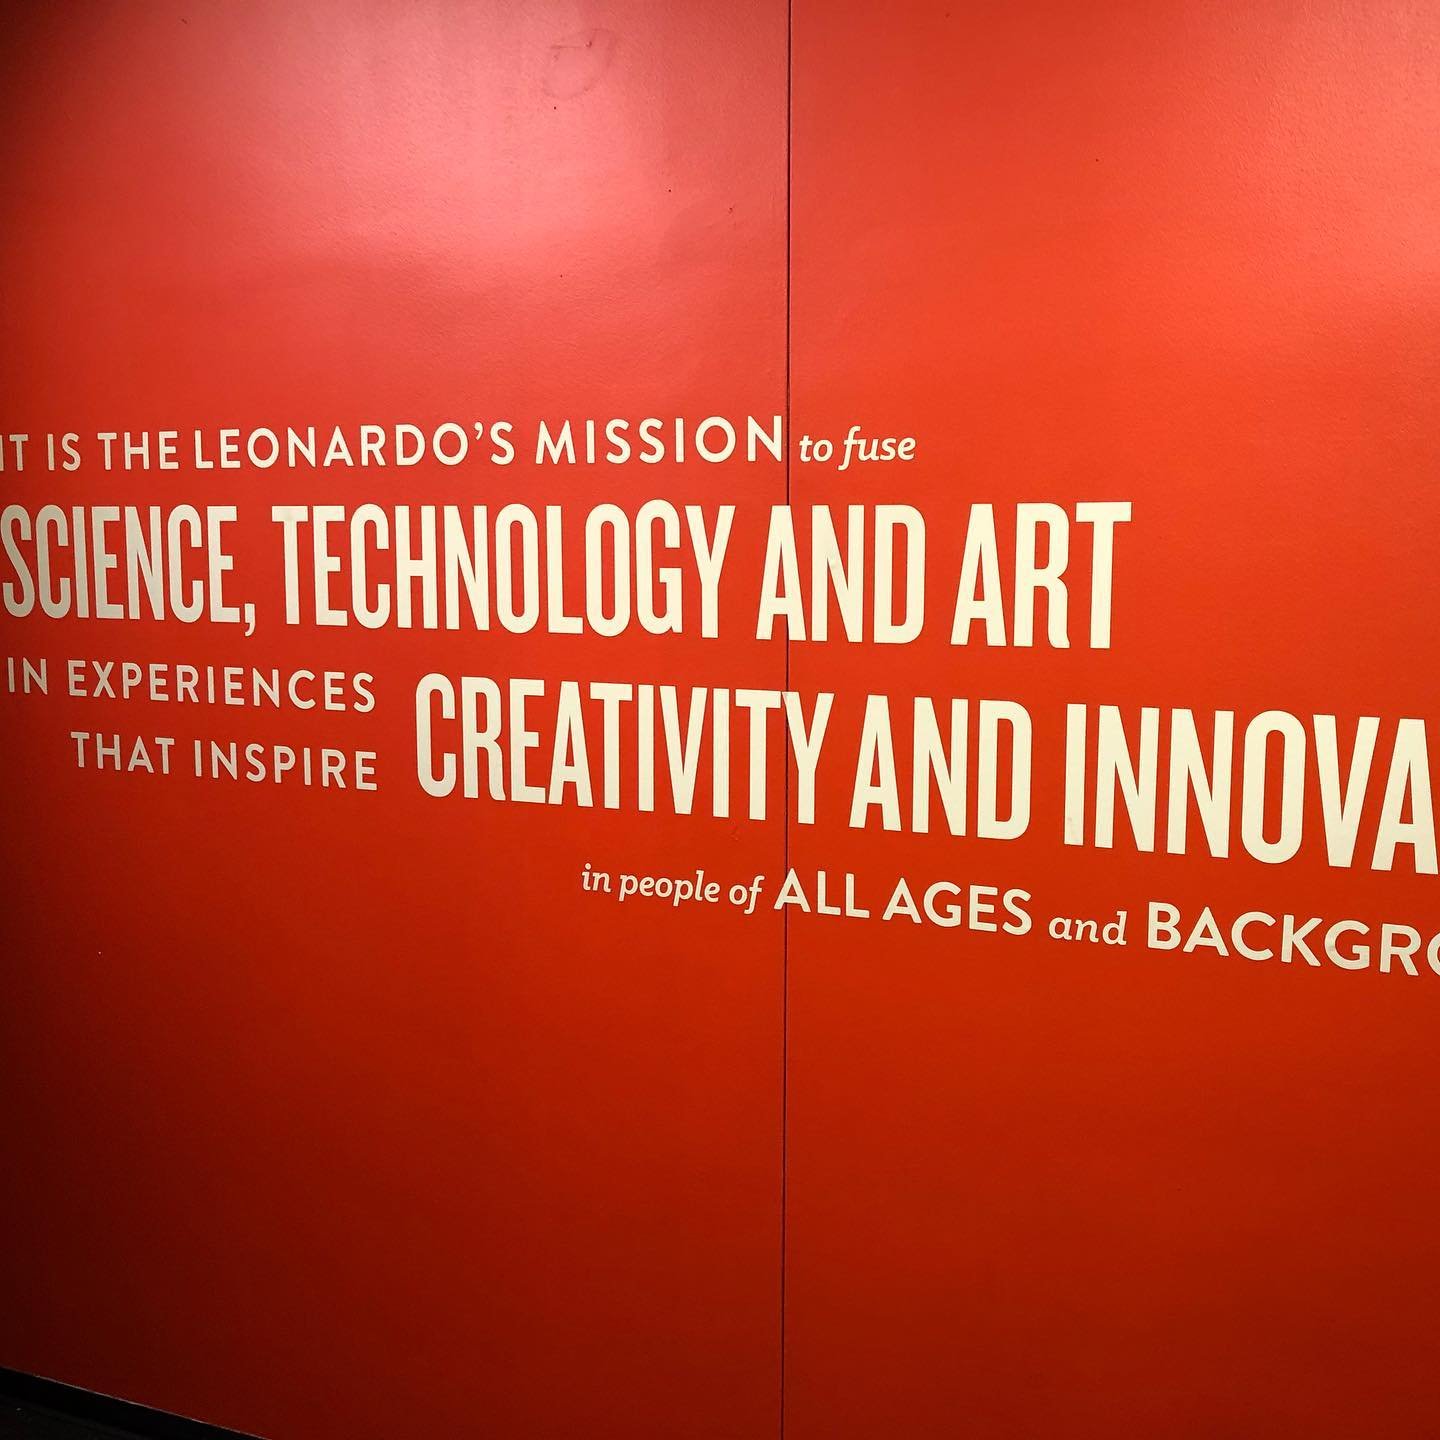 Science, technology, and art; creativity and innovation - keywords for @theleonardoslc in #saltlakecity ... Their exhibits span the gamut from interactive &ldquo;living&rdquo; sculptures like hanging jellyfish, to engines, to jet packs (yes, jet pack